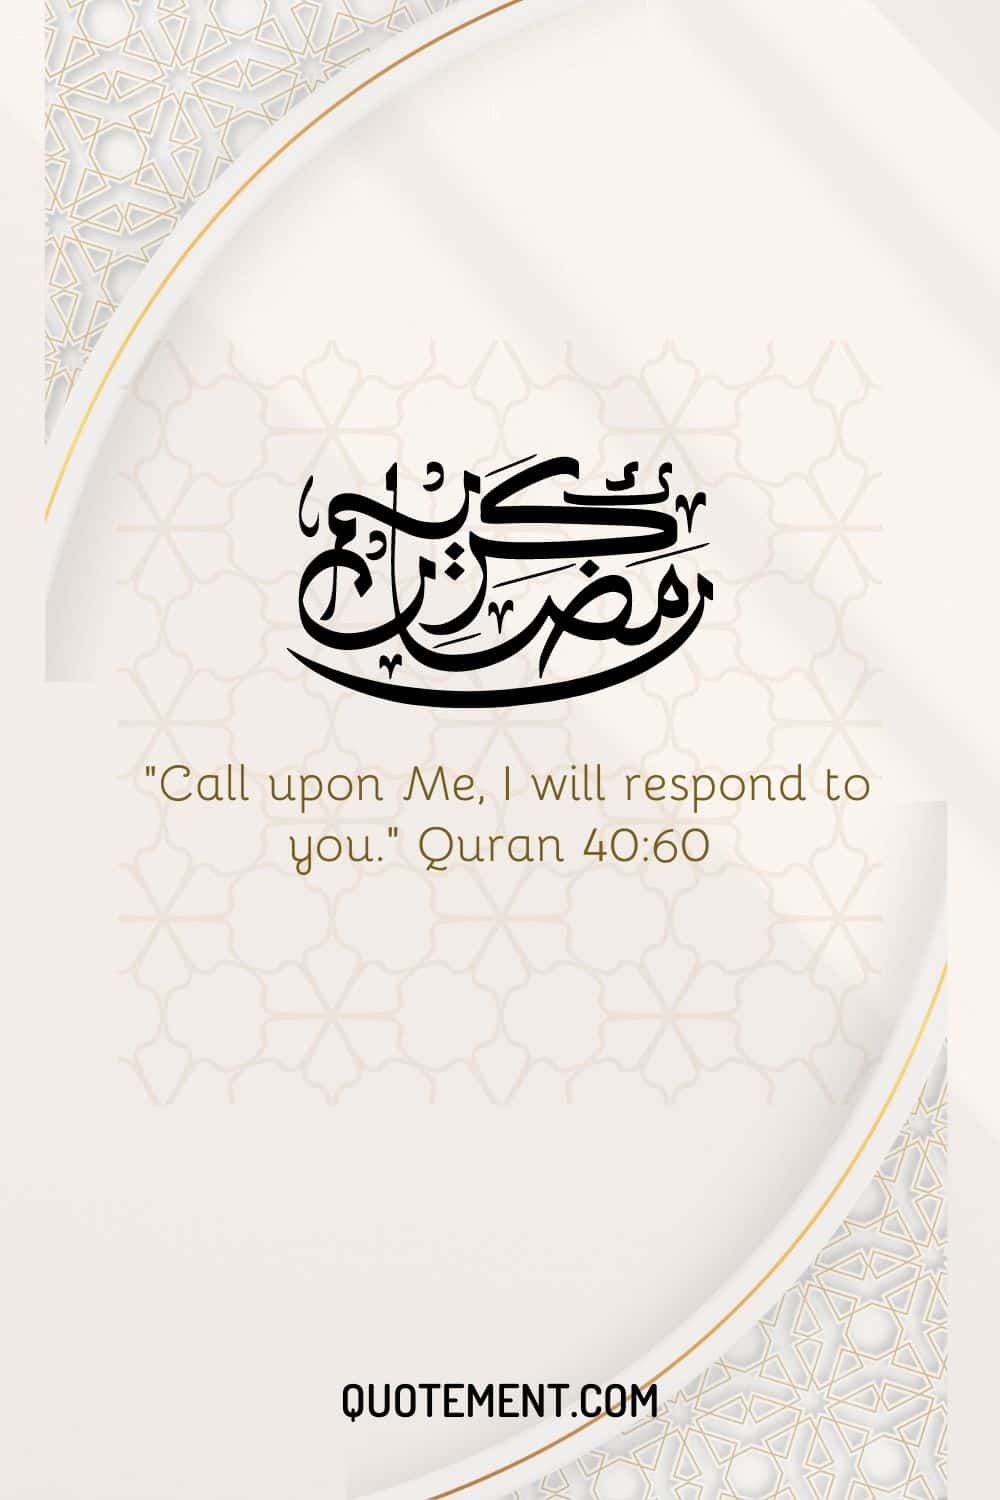 Call upon Me, I will respond to you